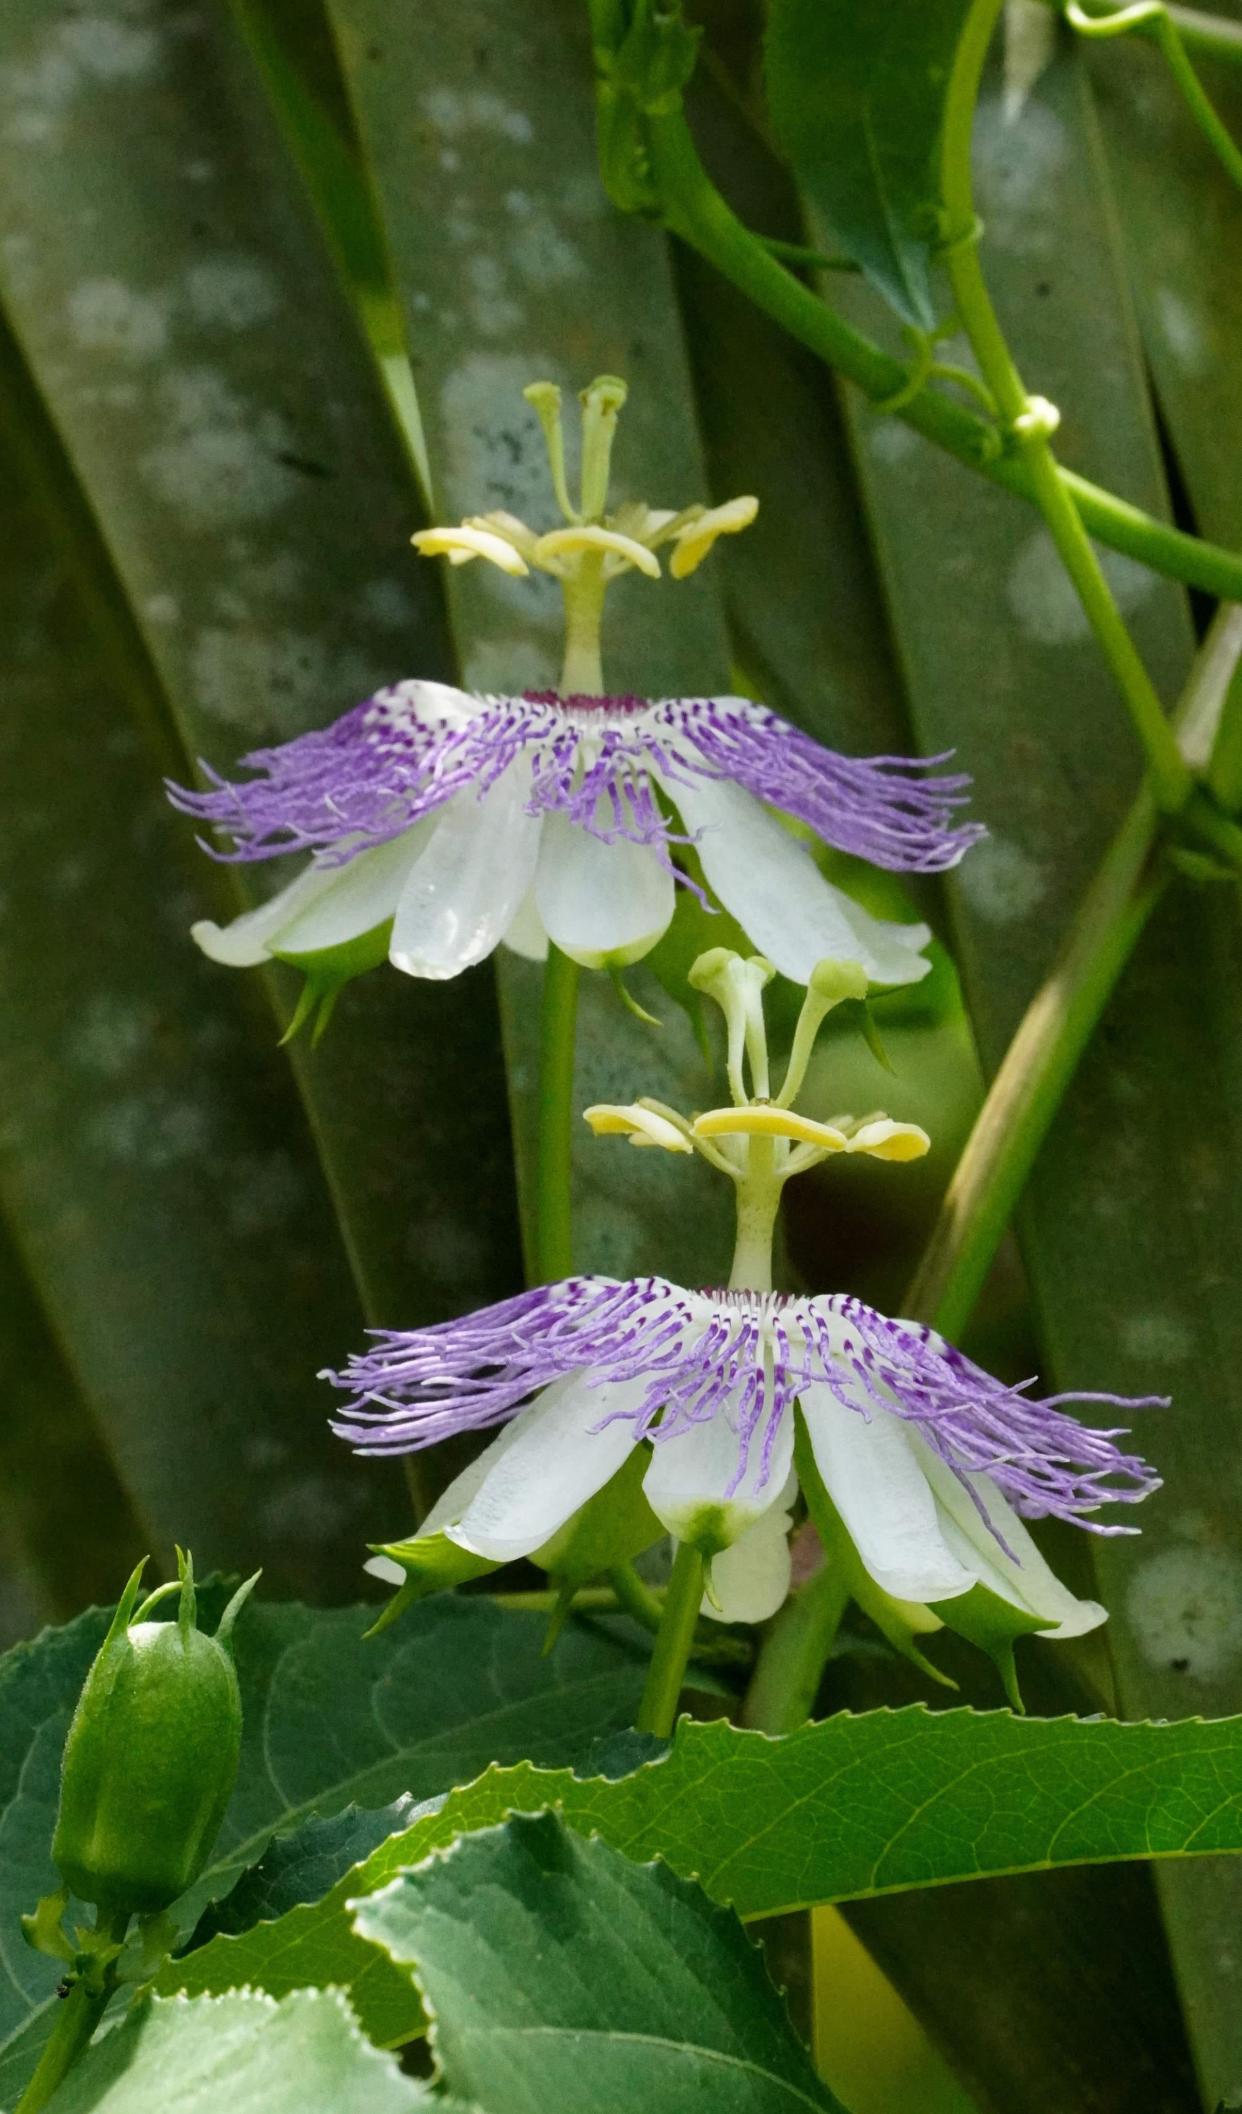 Passiflora incarnata displays stunning purple and white flowers, and produces edible fruits beloved by wildlife.